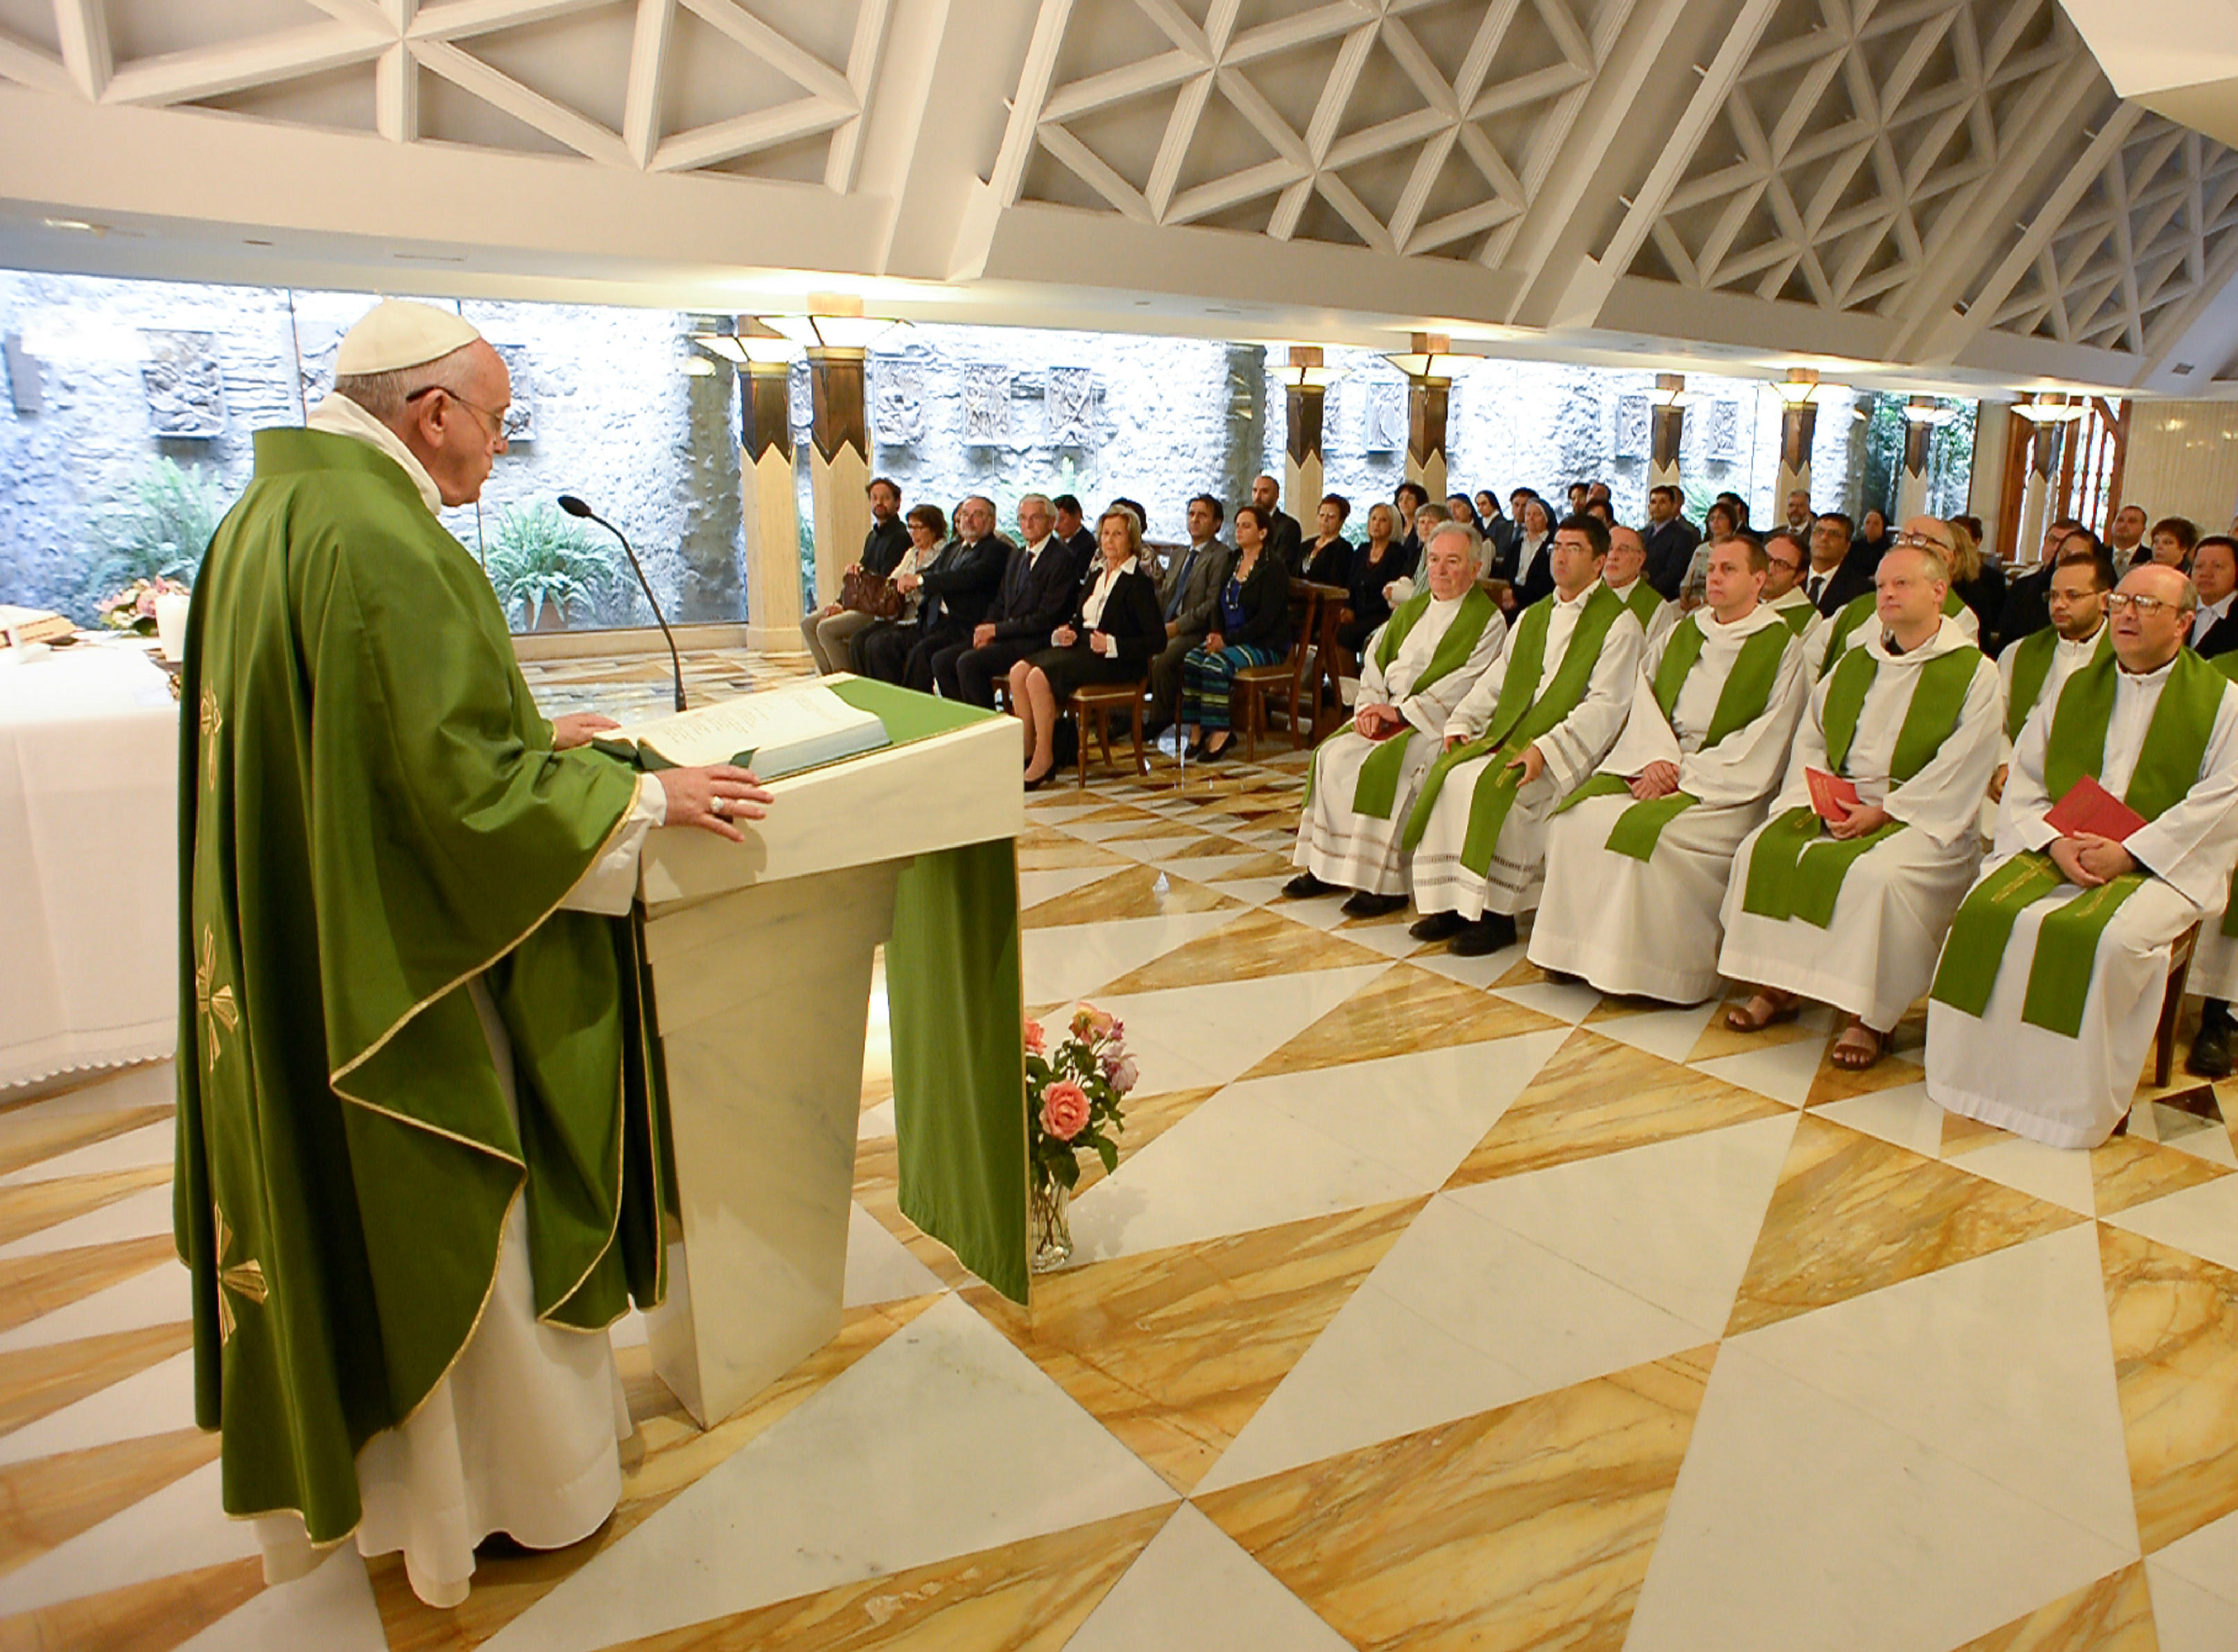 Pope Francis delivers his homily in Santa Marta on Tuesday